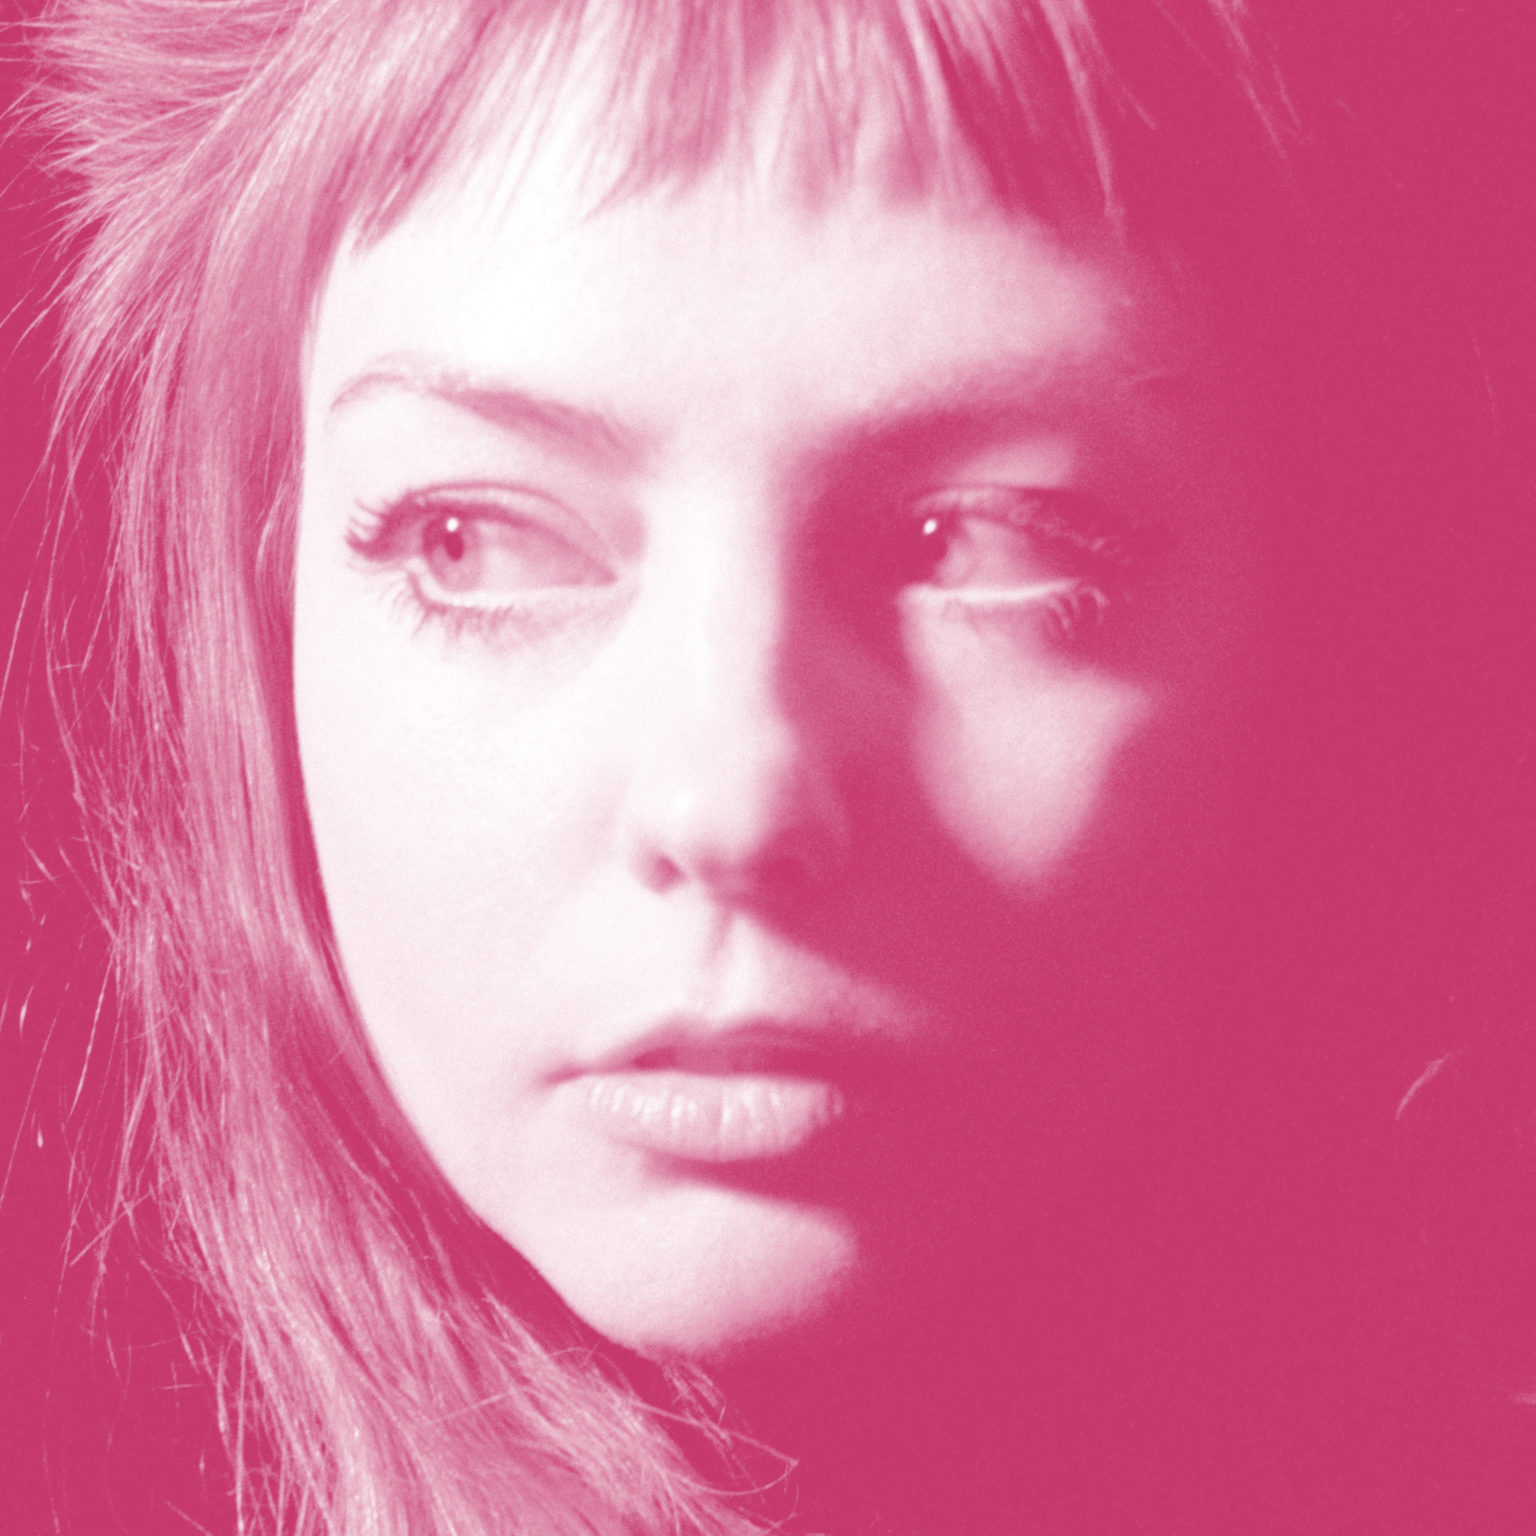 Angel Olsen has shared a new Mark Ronson remix of “New Love Cassette.” The track, off last year’s All Mirrors. Ronson’s remix turns “New Love Cassette”